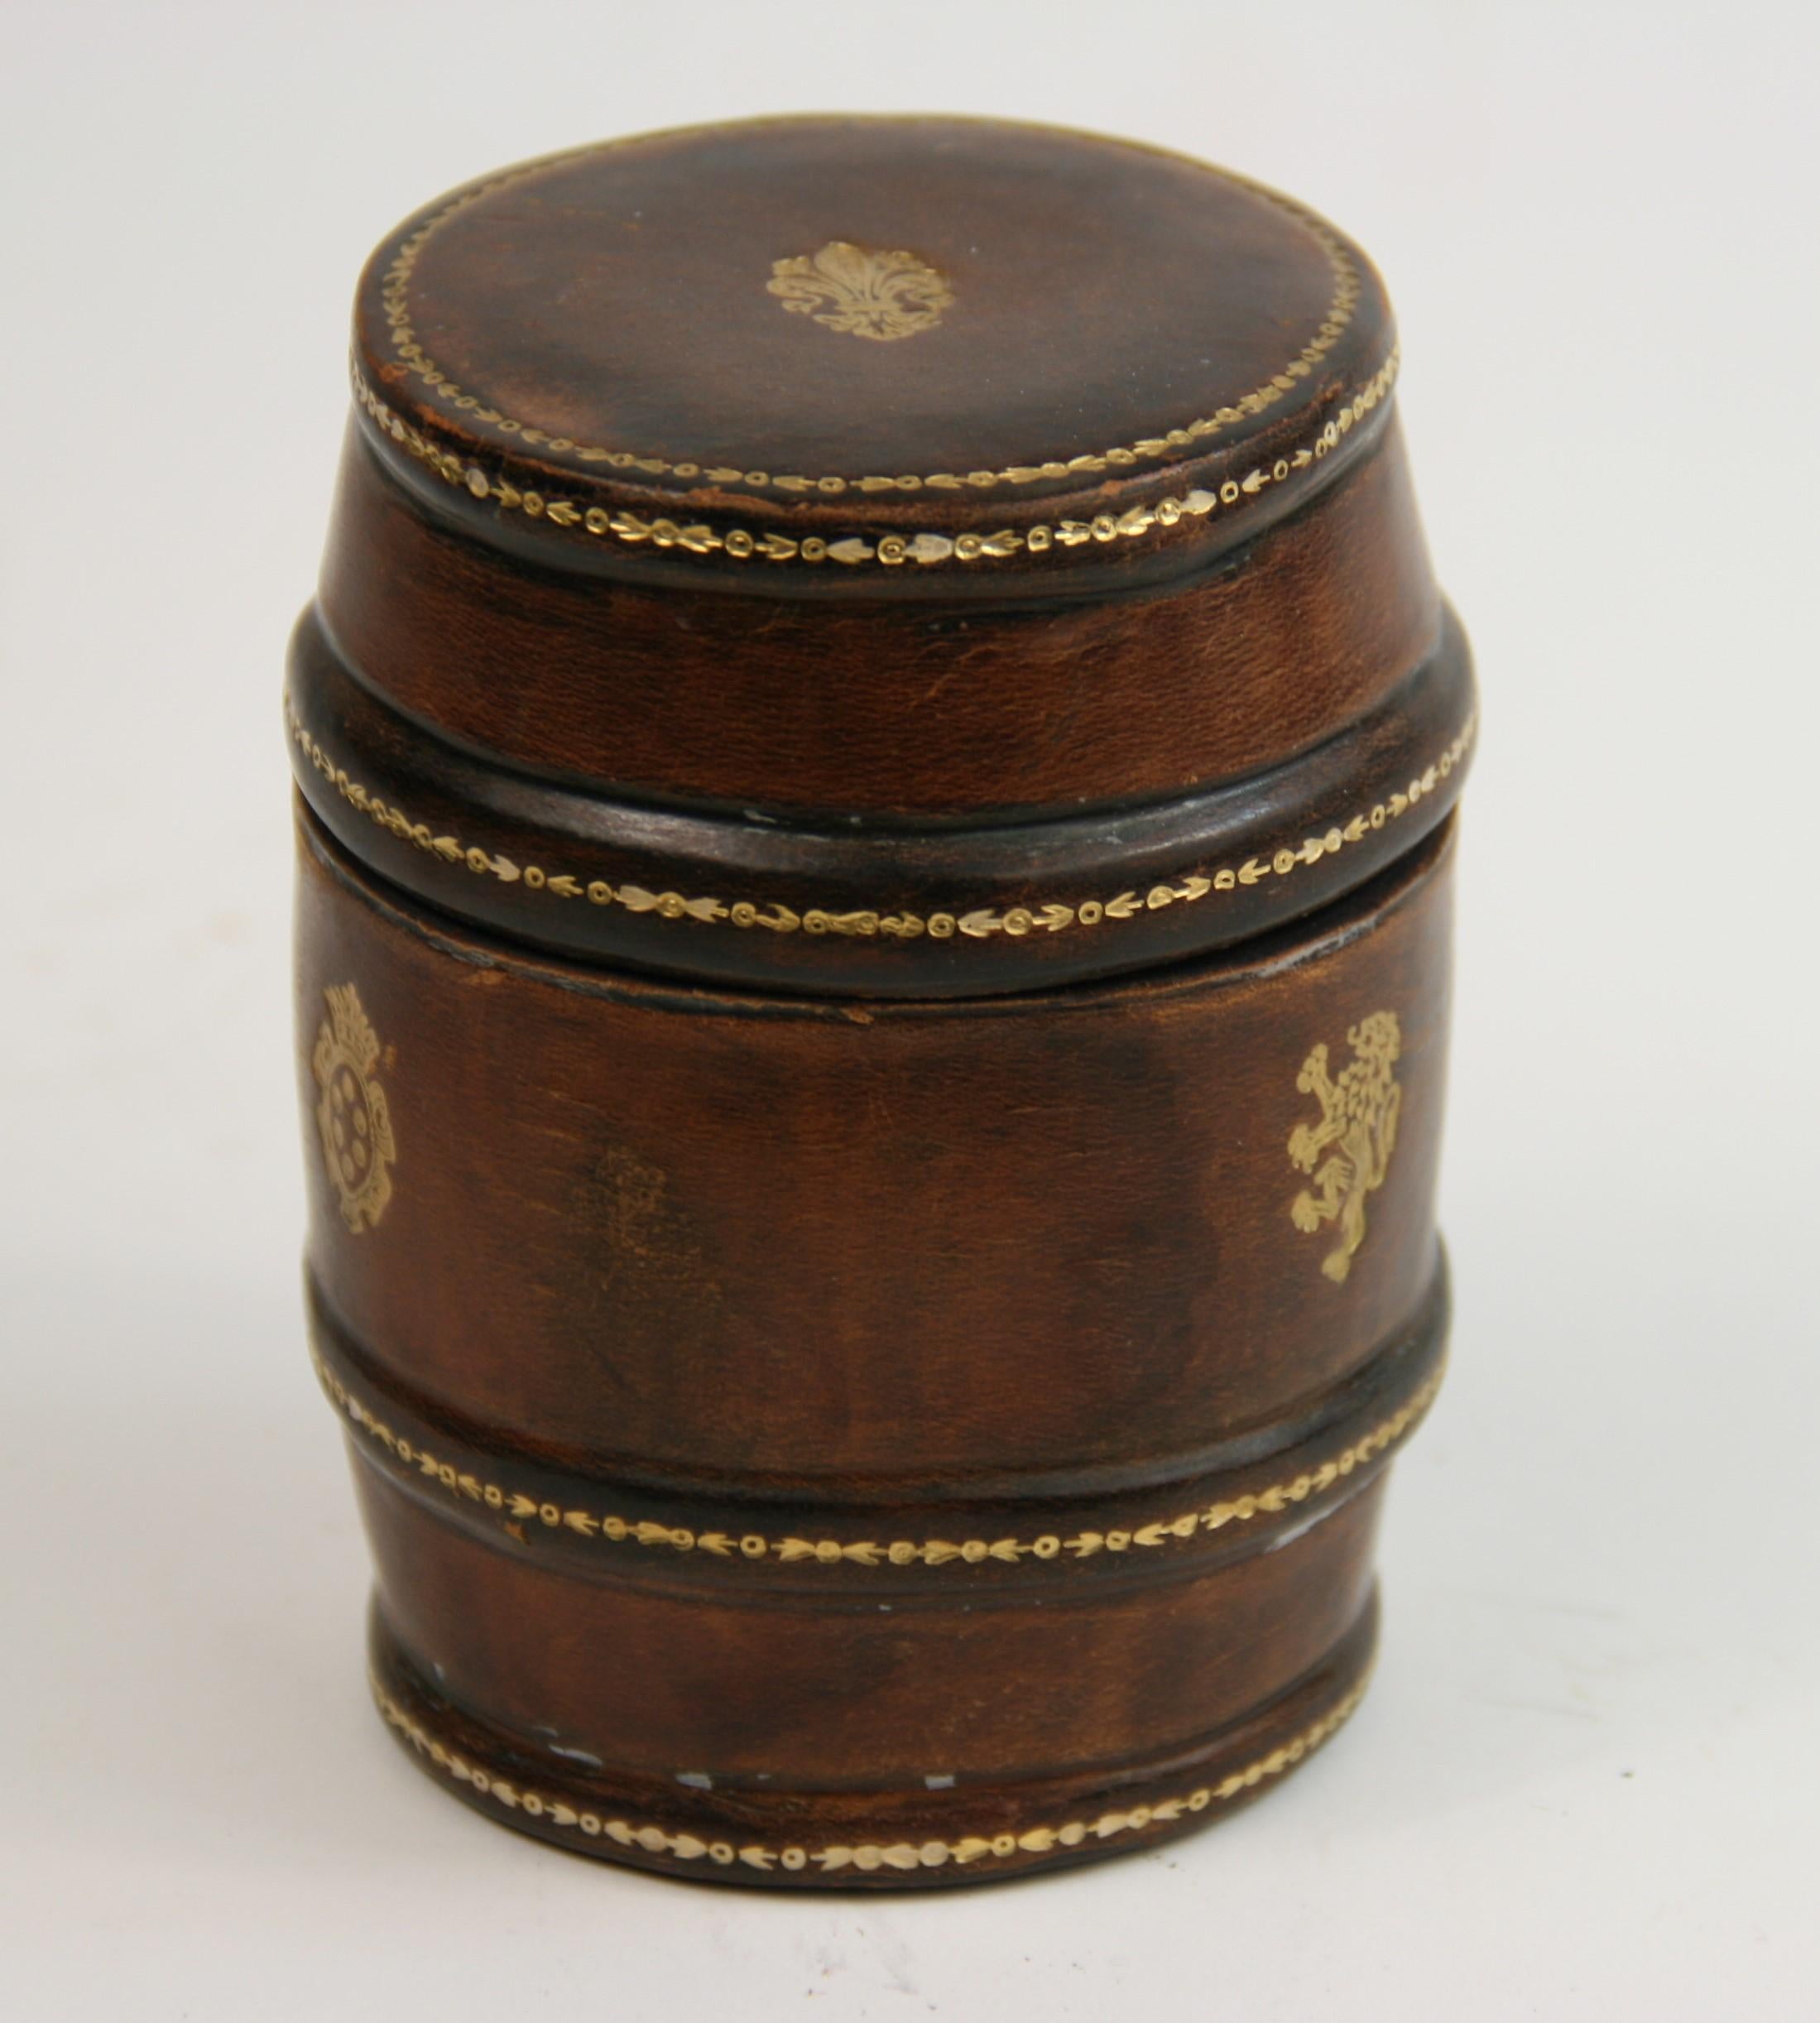 2-293 Italian round leather box can be used for storing small items od throwing dice.
Gilt detailing.